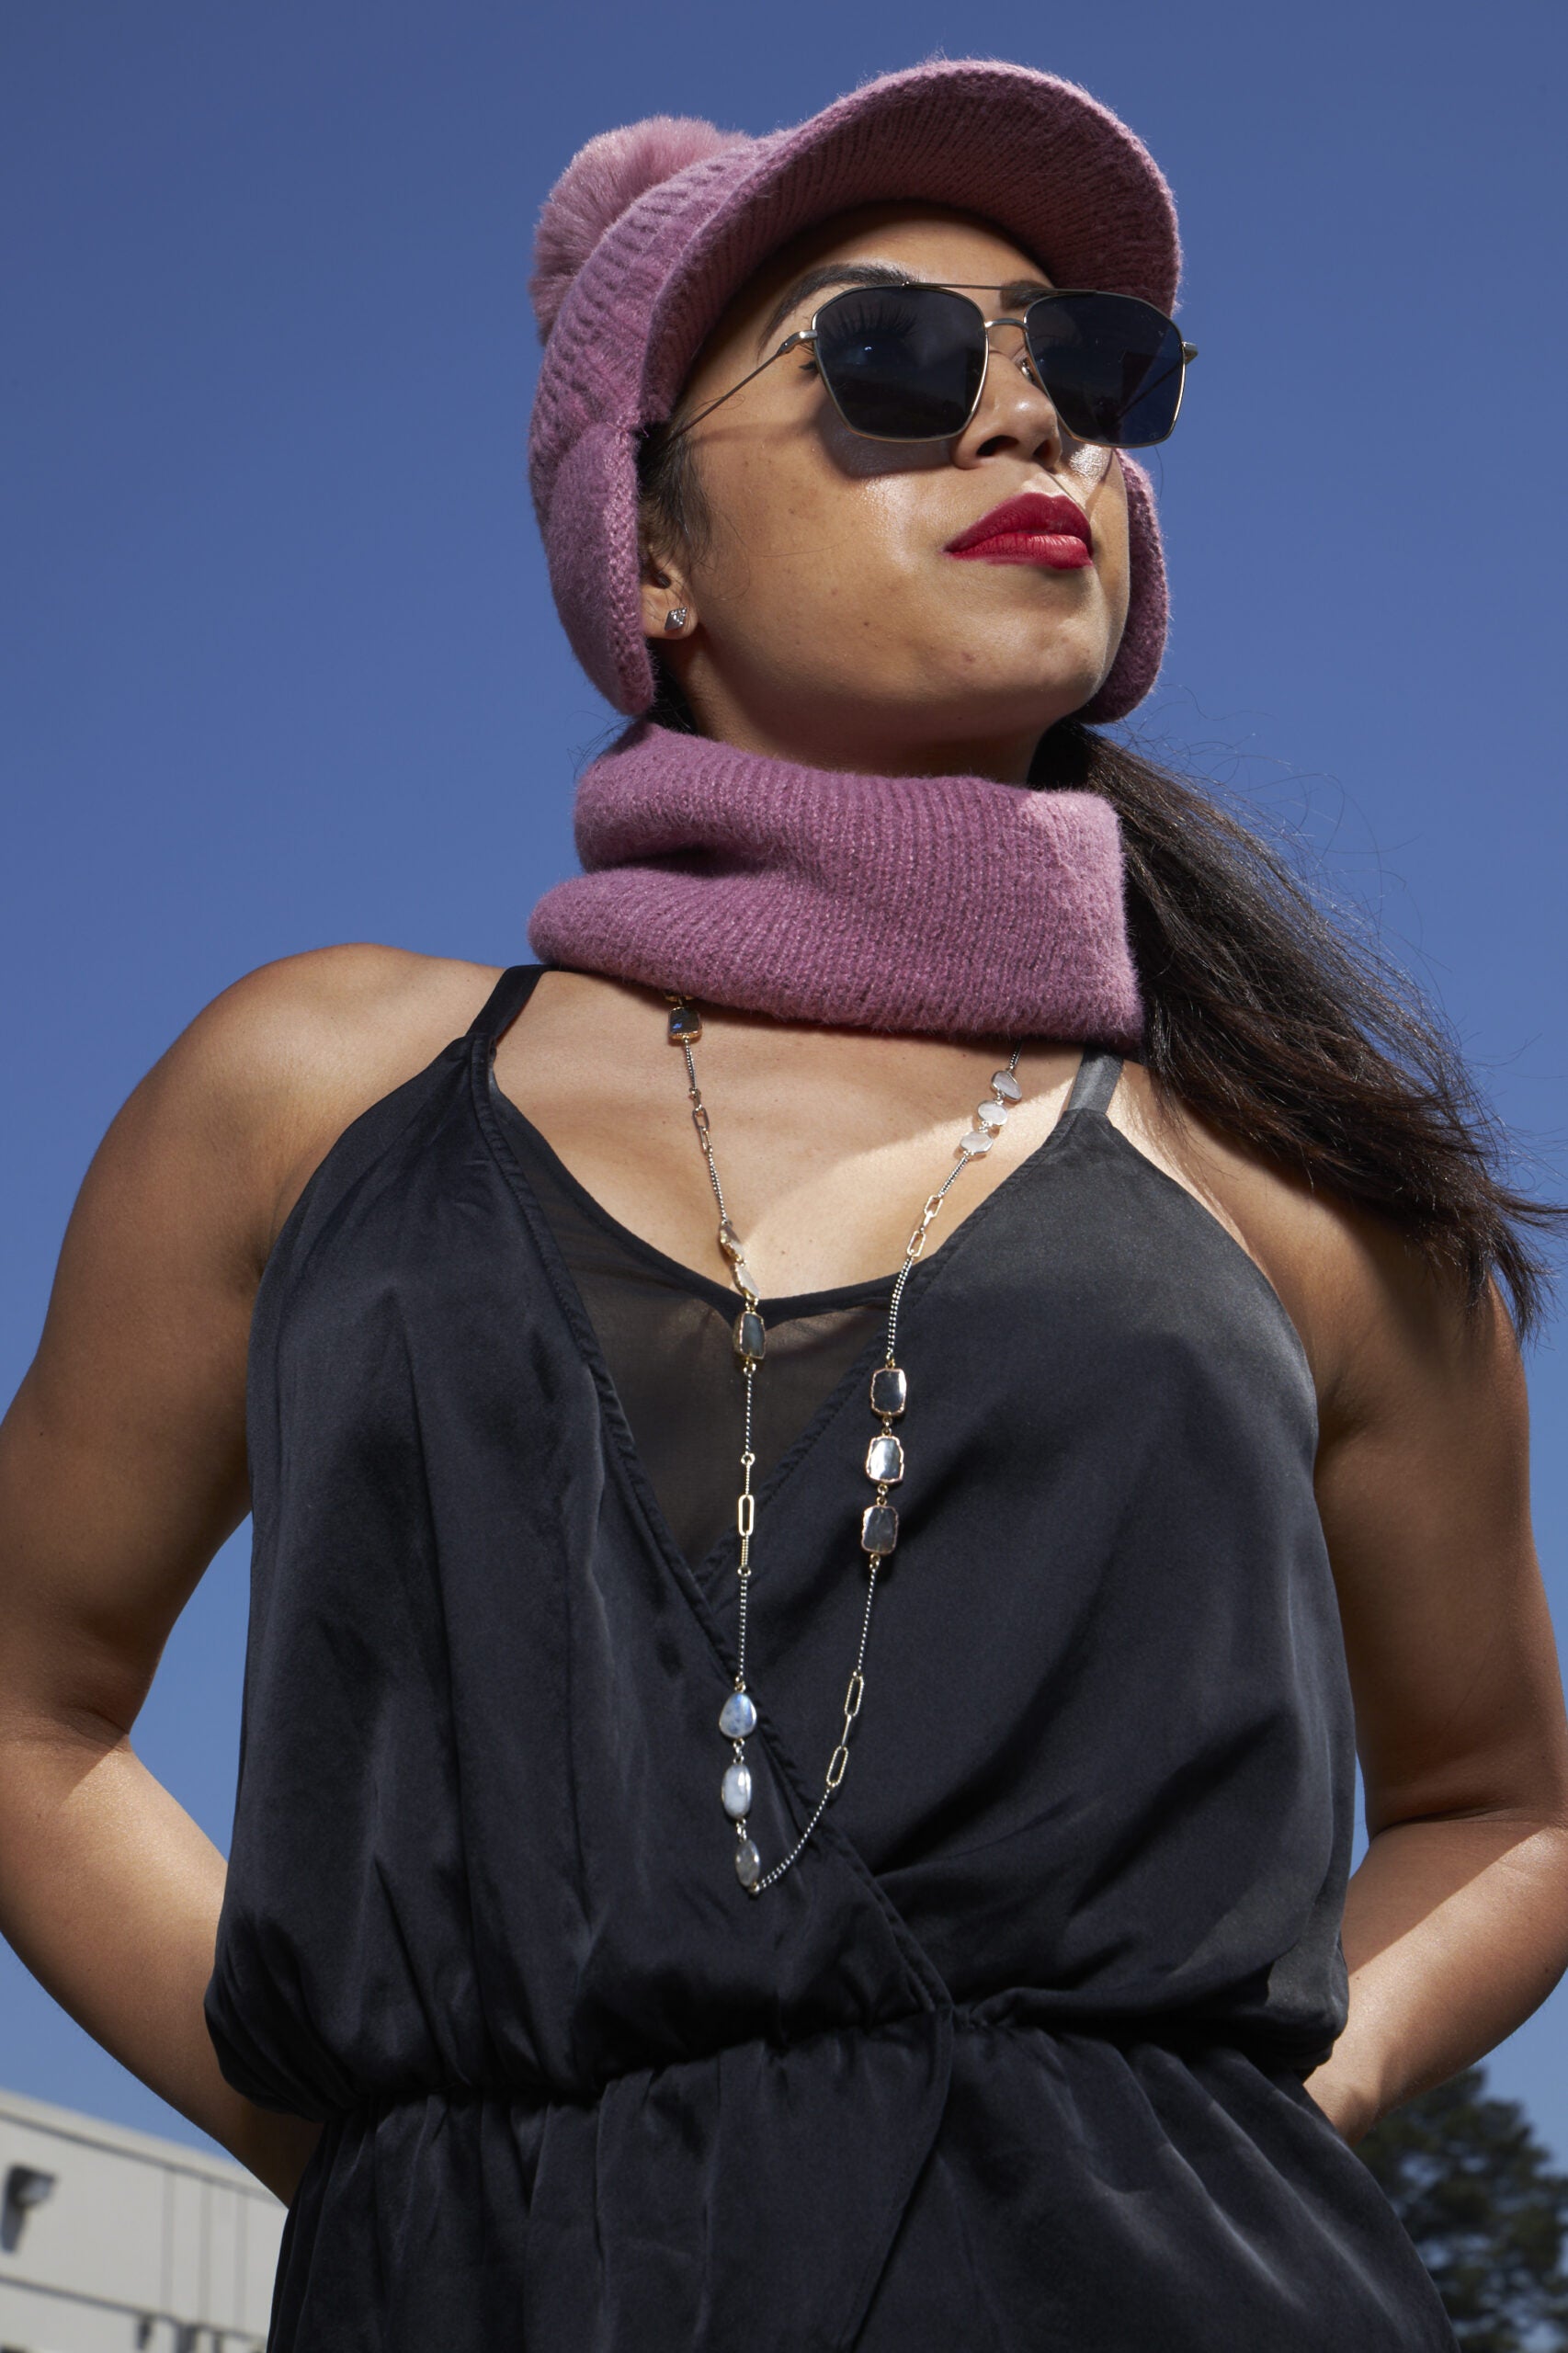 Sunglasses woman with a Mulberry pink beanie and scarf